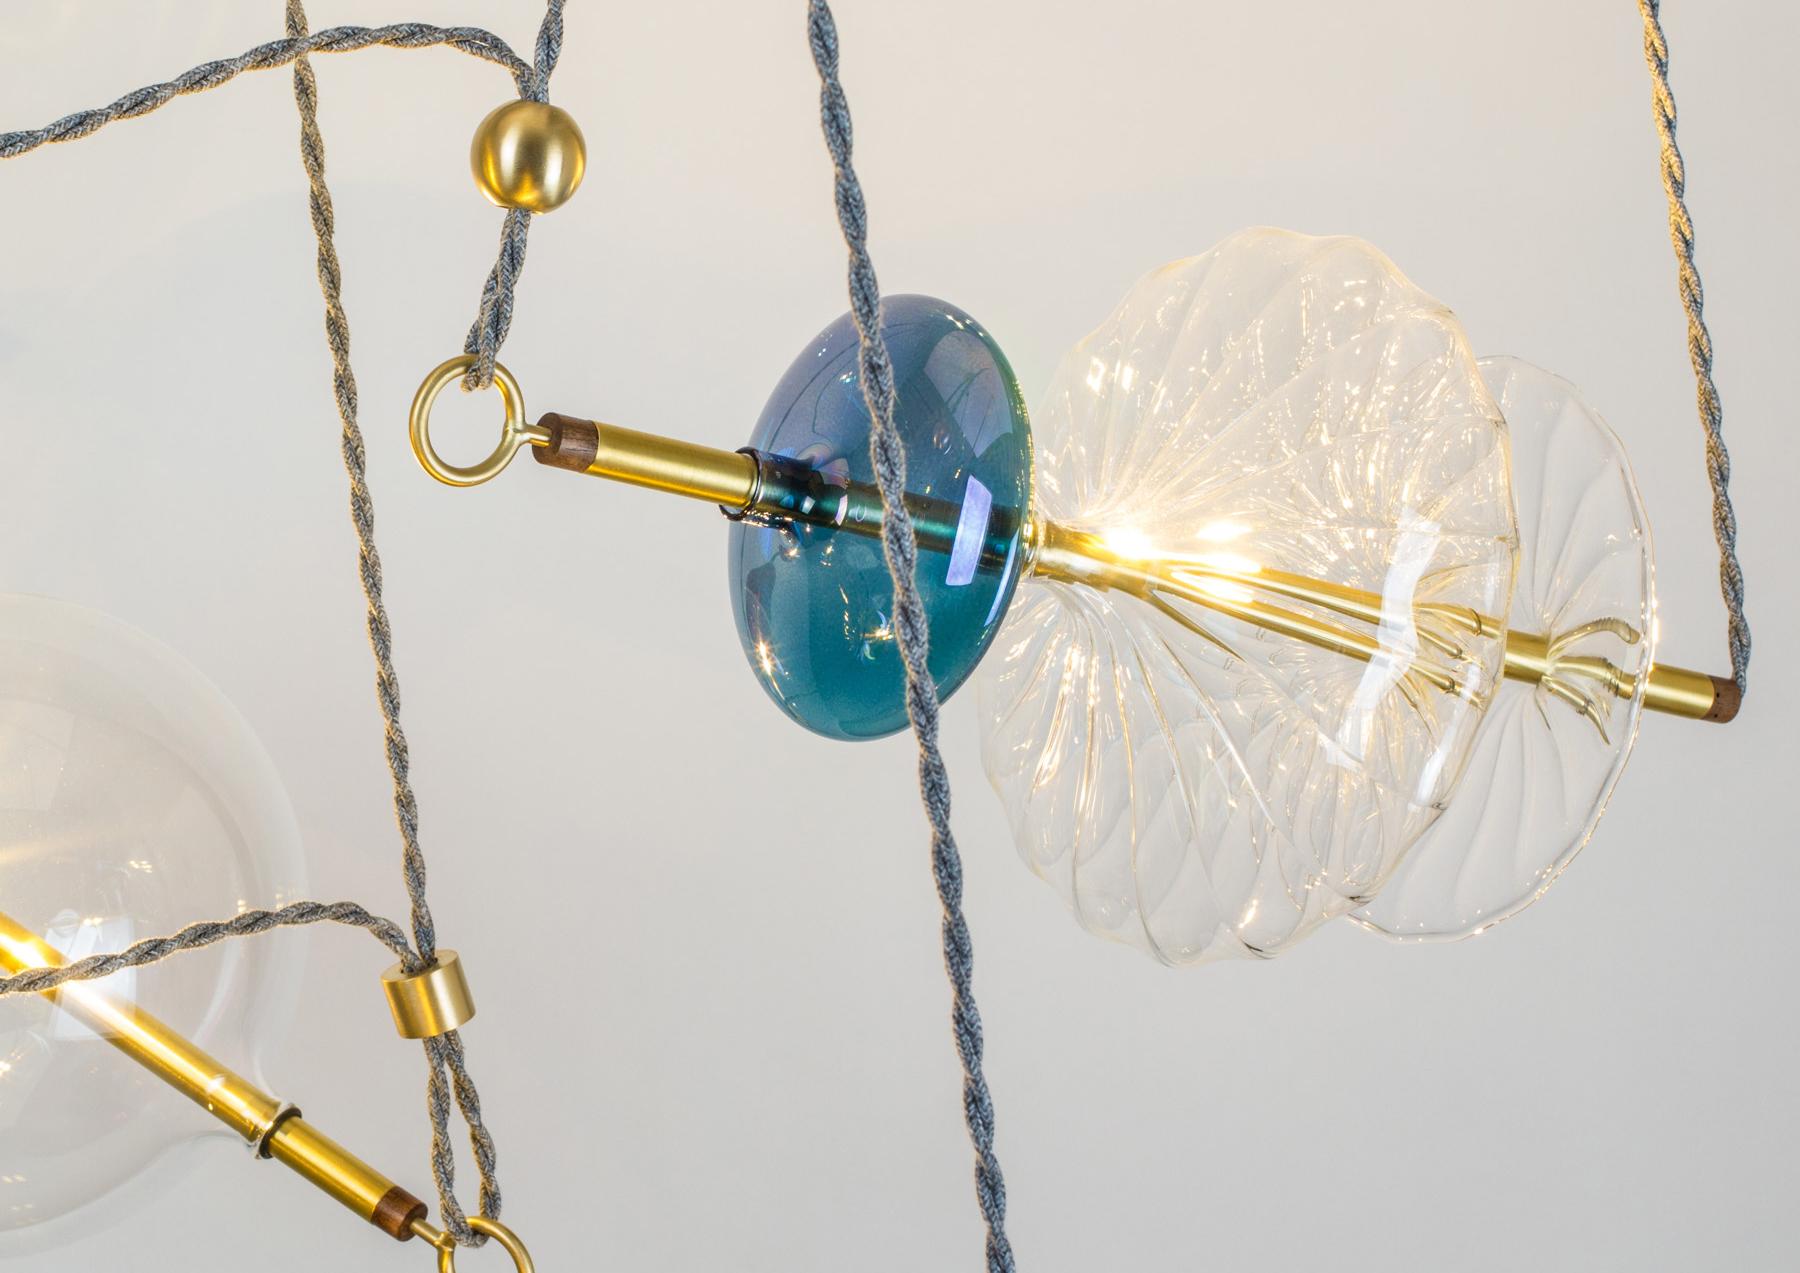 Hand-Crafted Trapezi Four Lights Pendant/Chandelier Polished Brass Colorful Handblown Glass